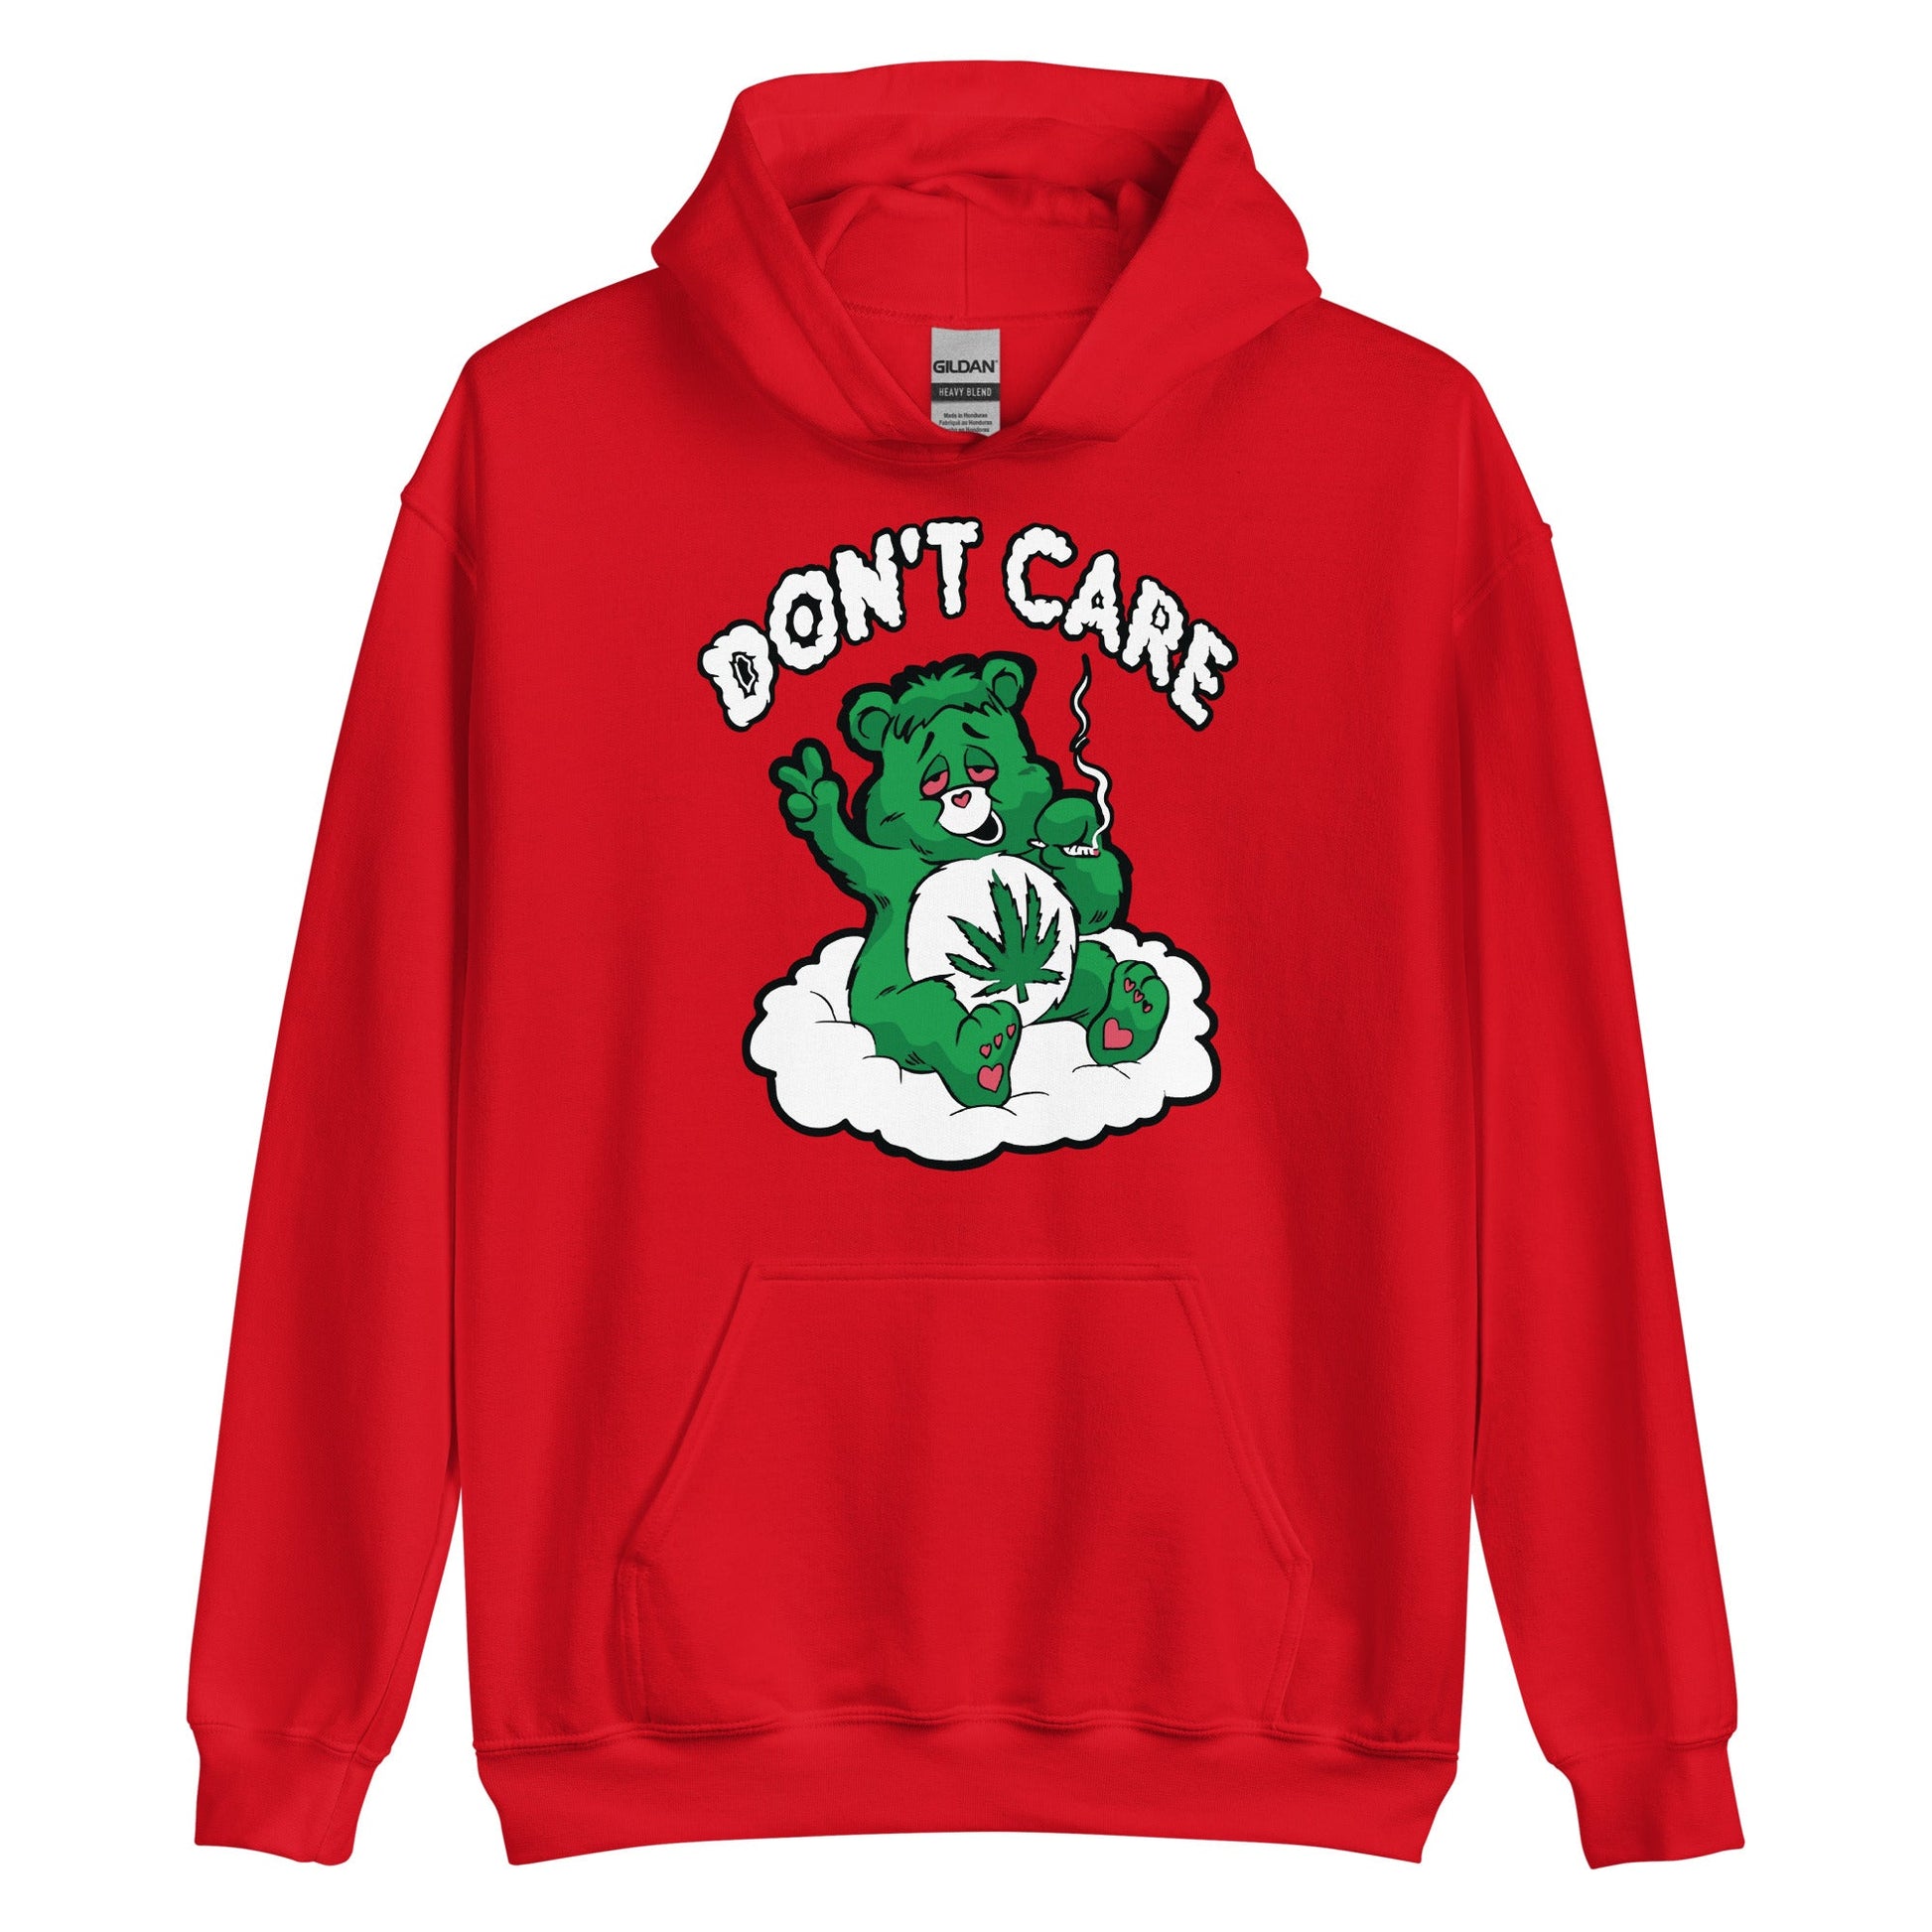 Introducing our cheeky and carefree "I Don't Care Bear" Hoodie, a bold expression of nonchalant attitude and carefree vibes. - The Truth Graphics